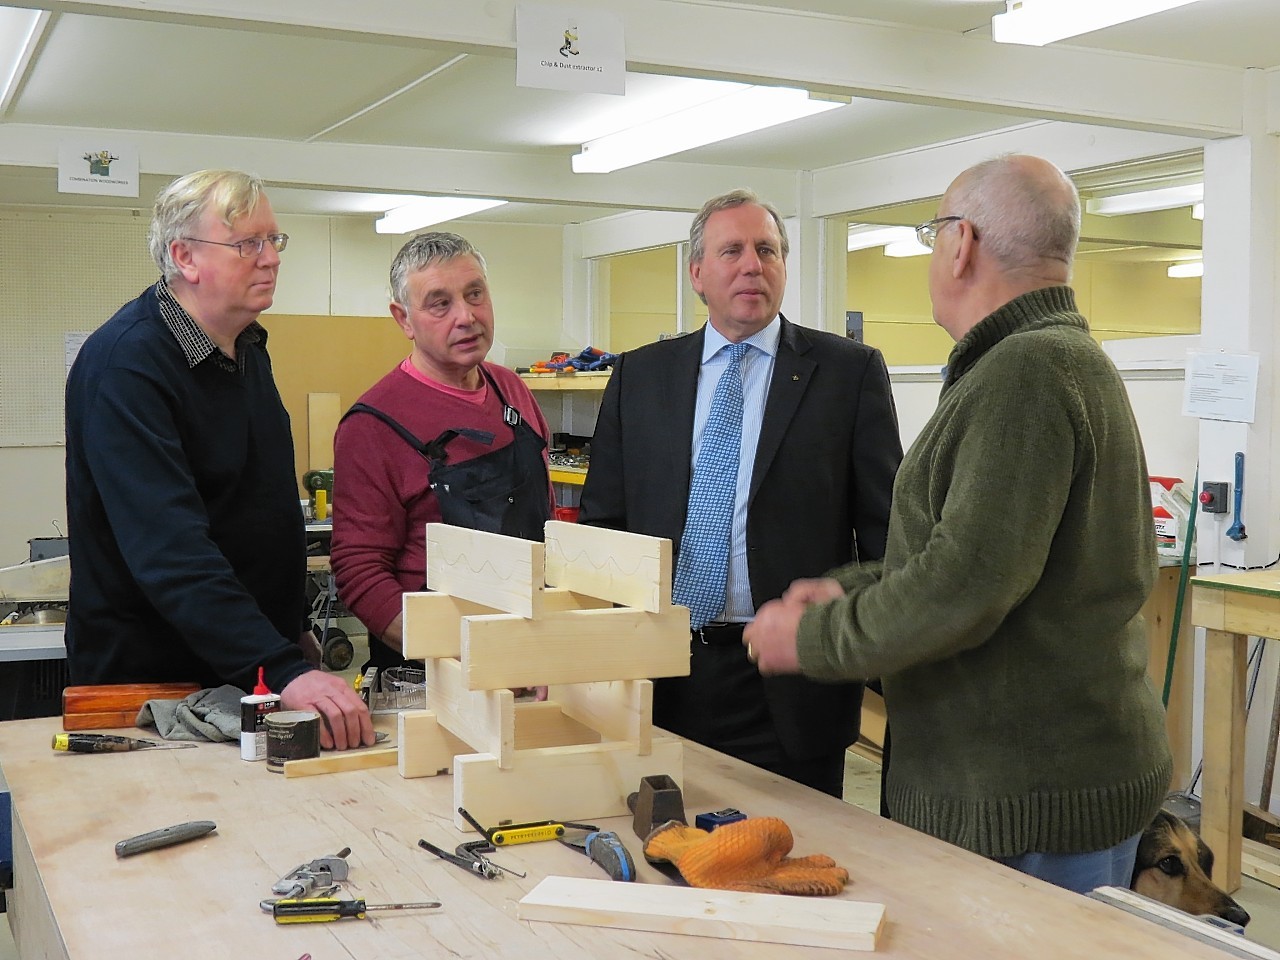 Westhill Men's Shed: Nick Pilbeam, Lui Forno, Dennis Robertson MSP, Mike Benzie